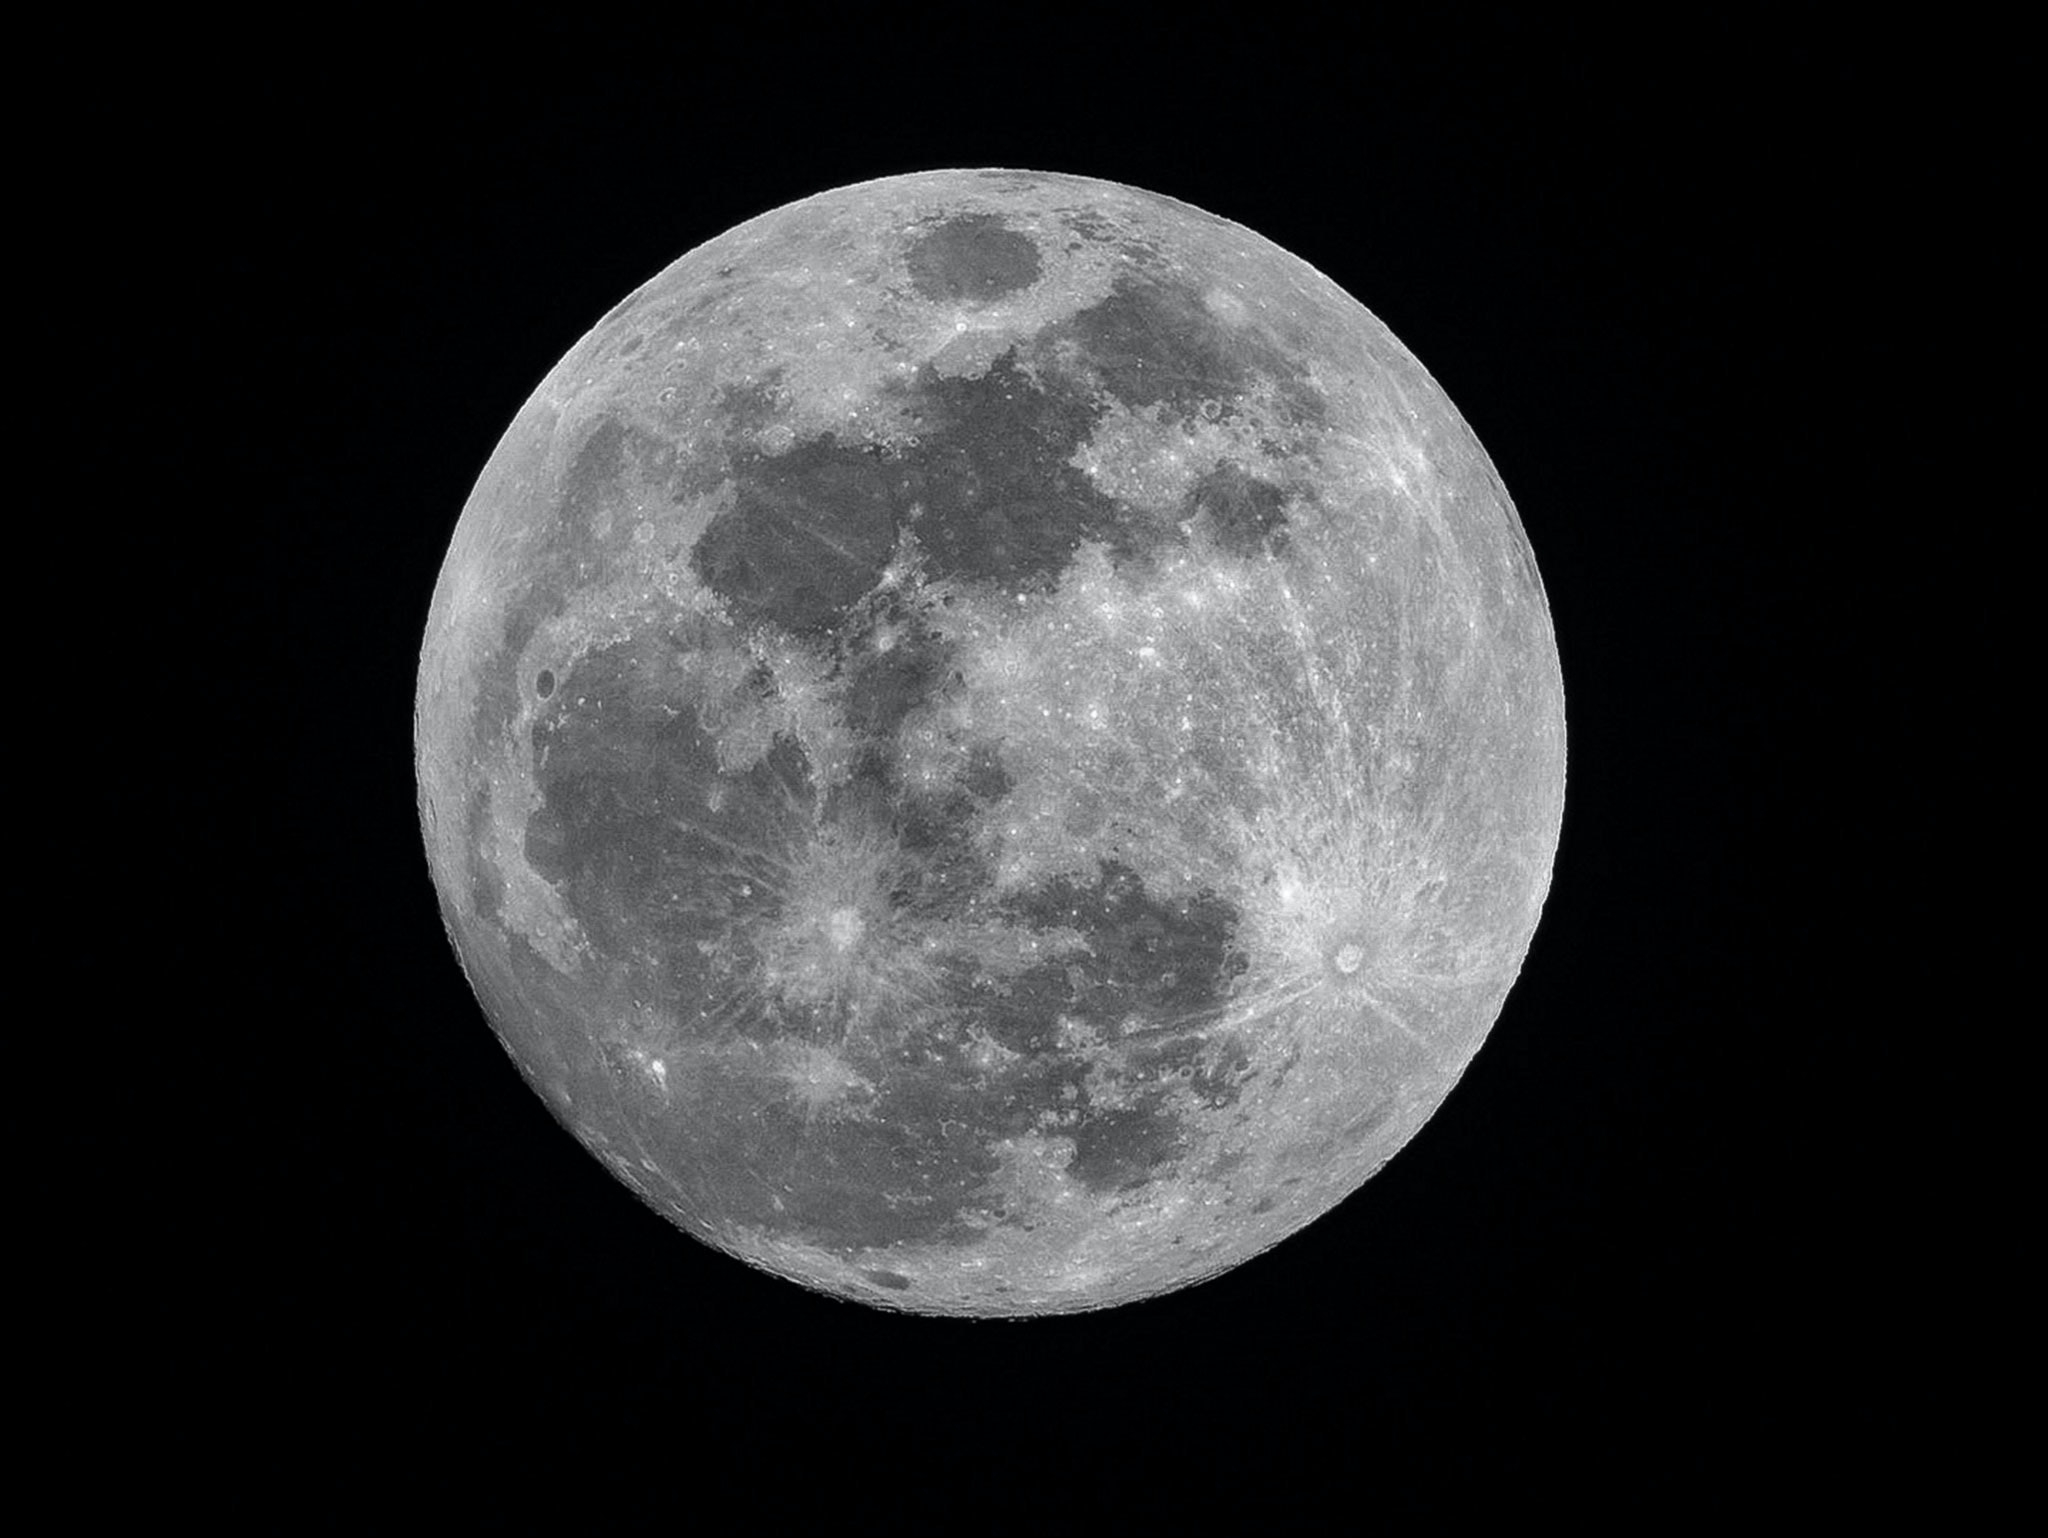 Black & White picture of a full moon.